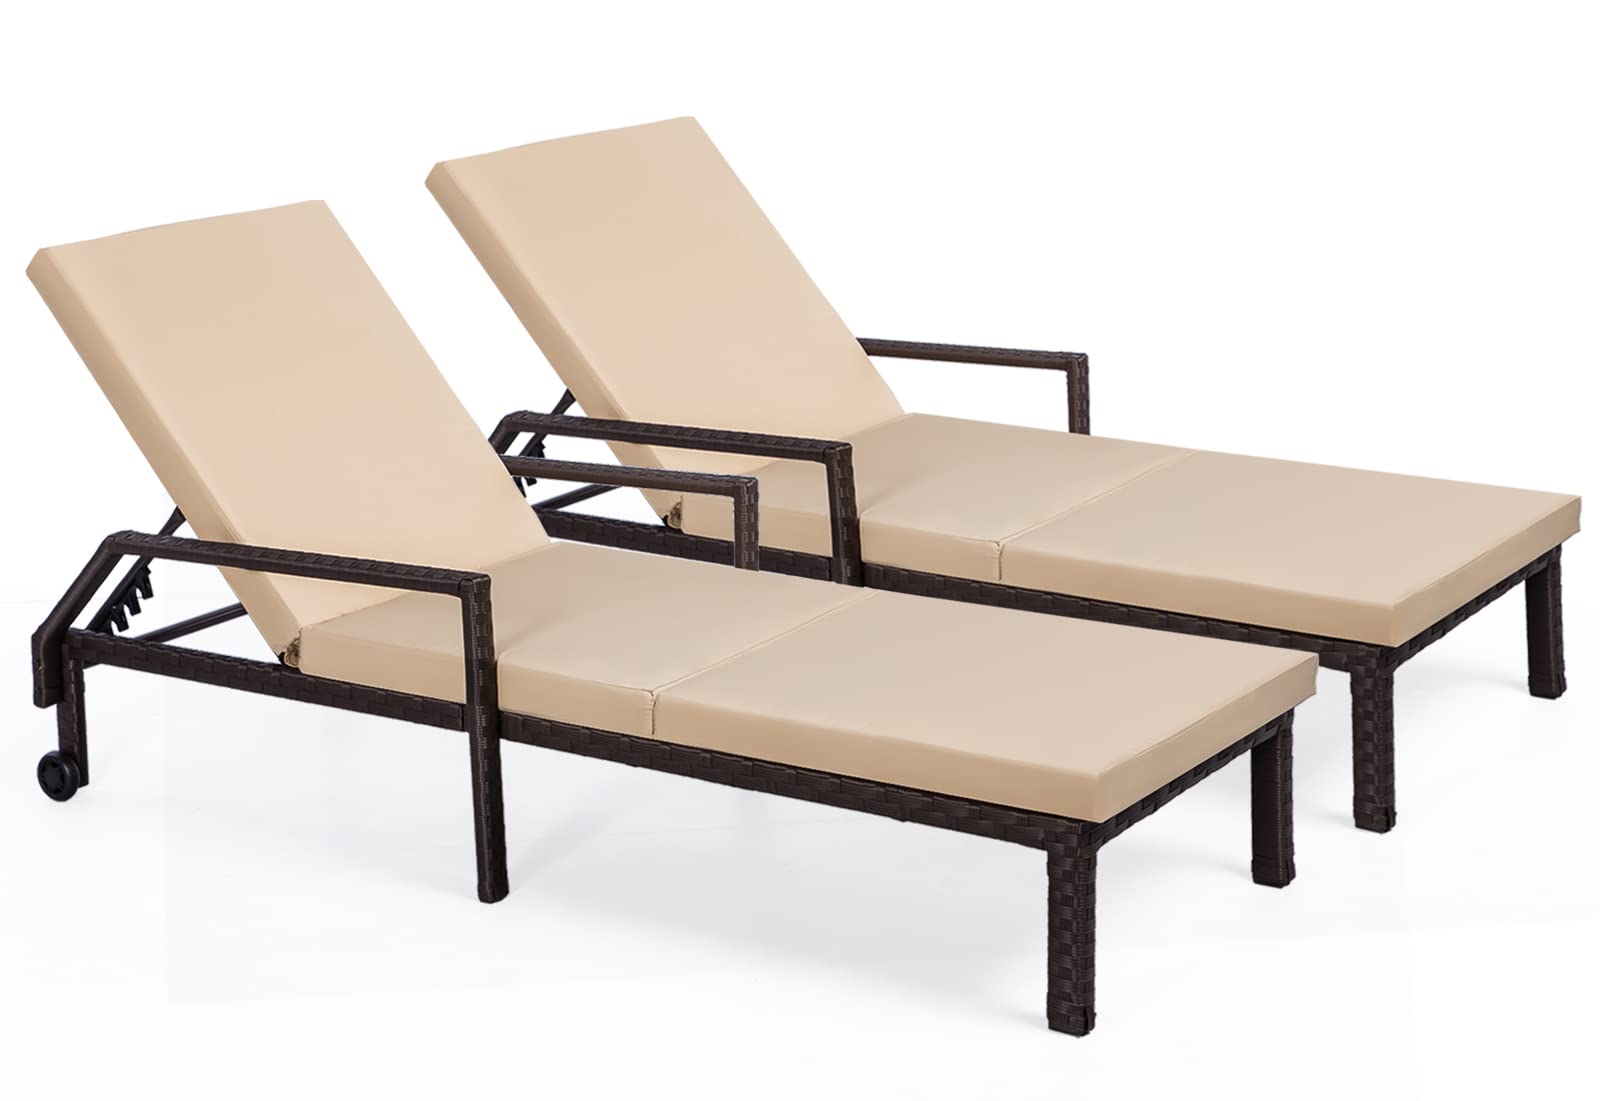 AECOJOY Outdoor Lounge Chairs Set of 2, Outdoor Chaise Lounge with Thickened Cushion and Adjustable Backrest for Poolside Backyard Deck Porch Garden, Brown Rattan with Beige Cushion